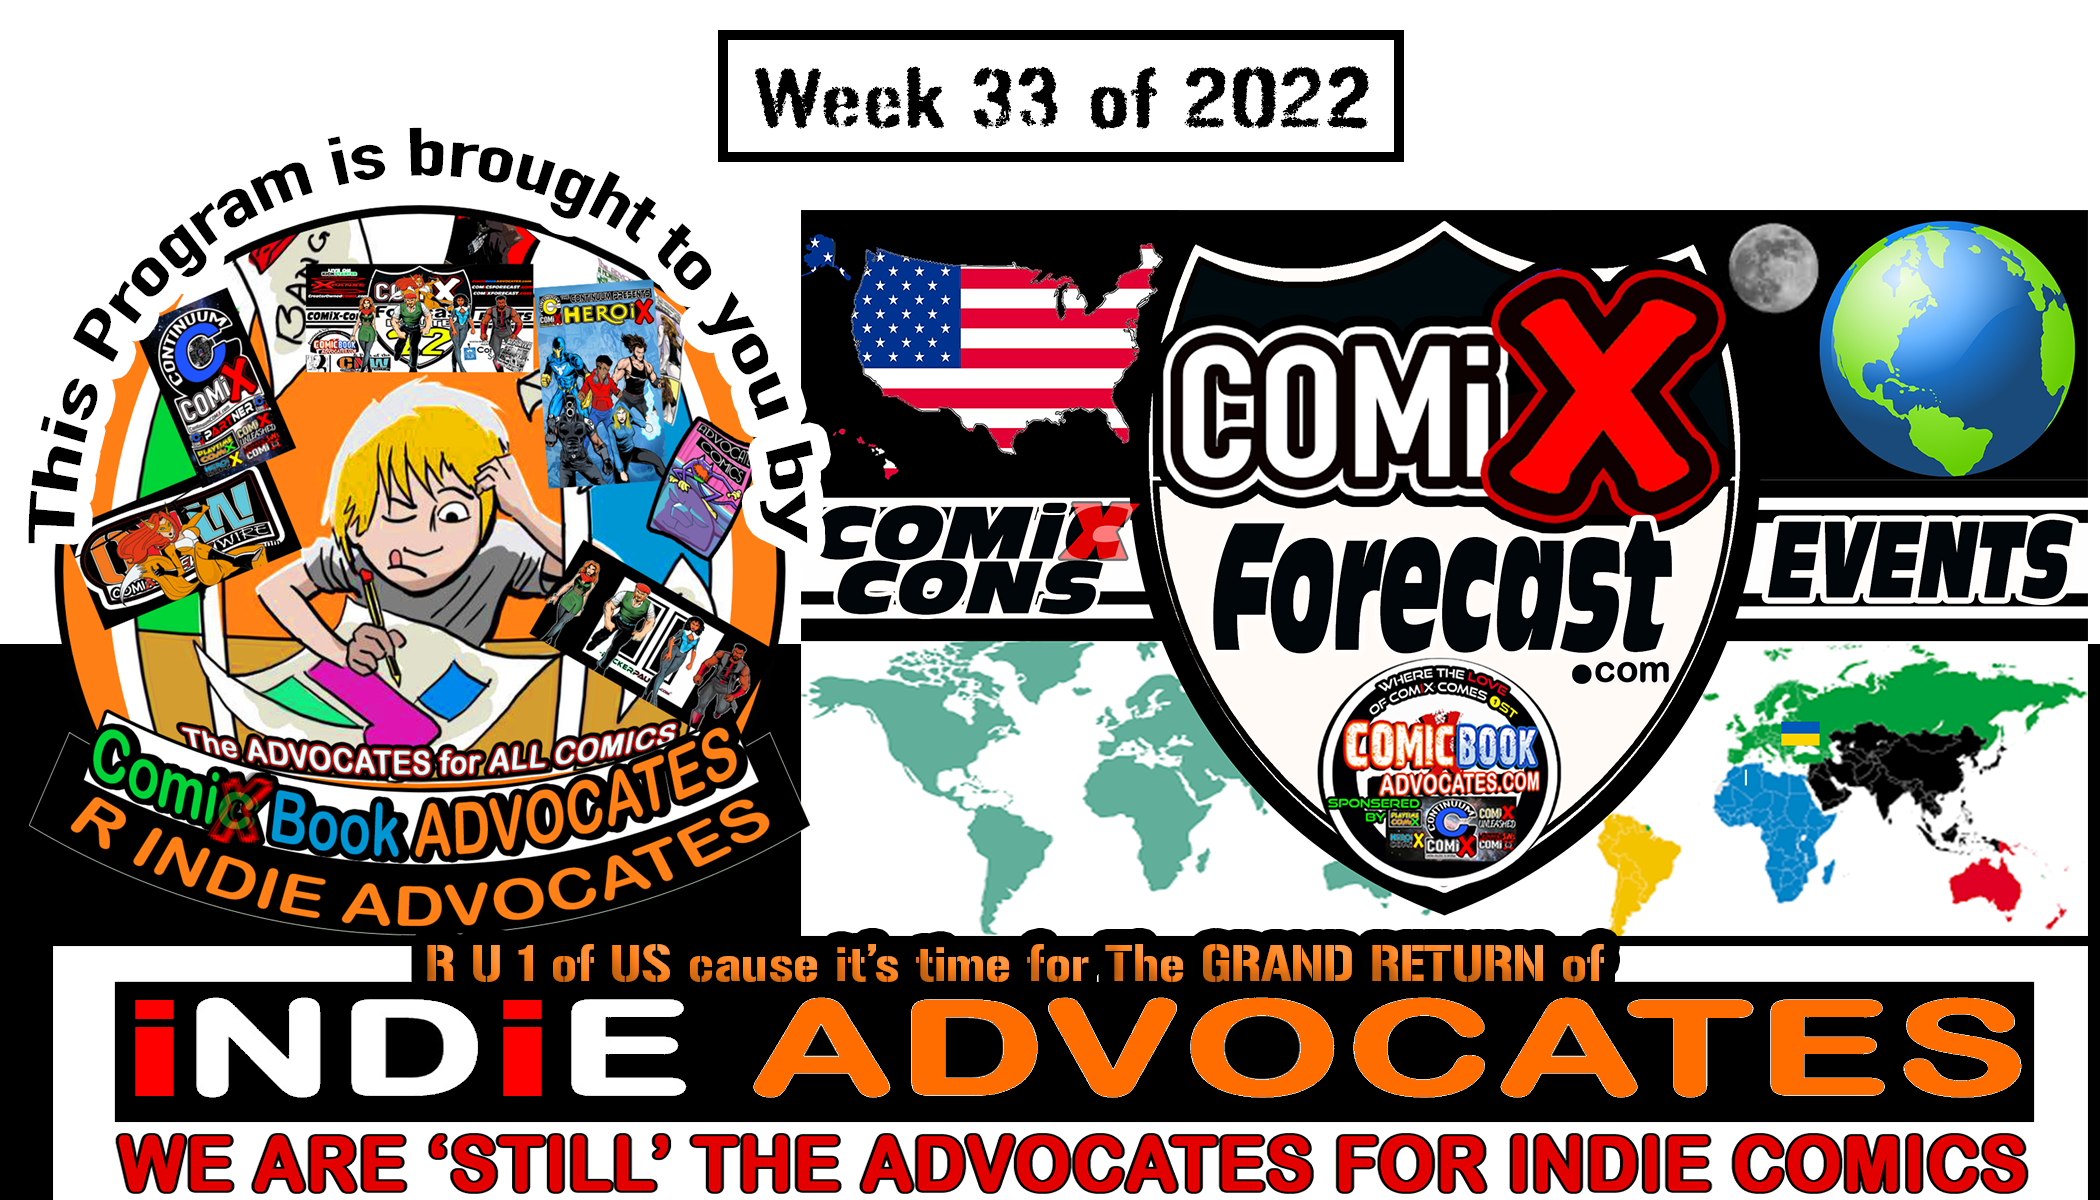 An iNDiE ADVOCATING FORECAST for Wk 33 of 22 8/18-21/22